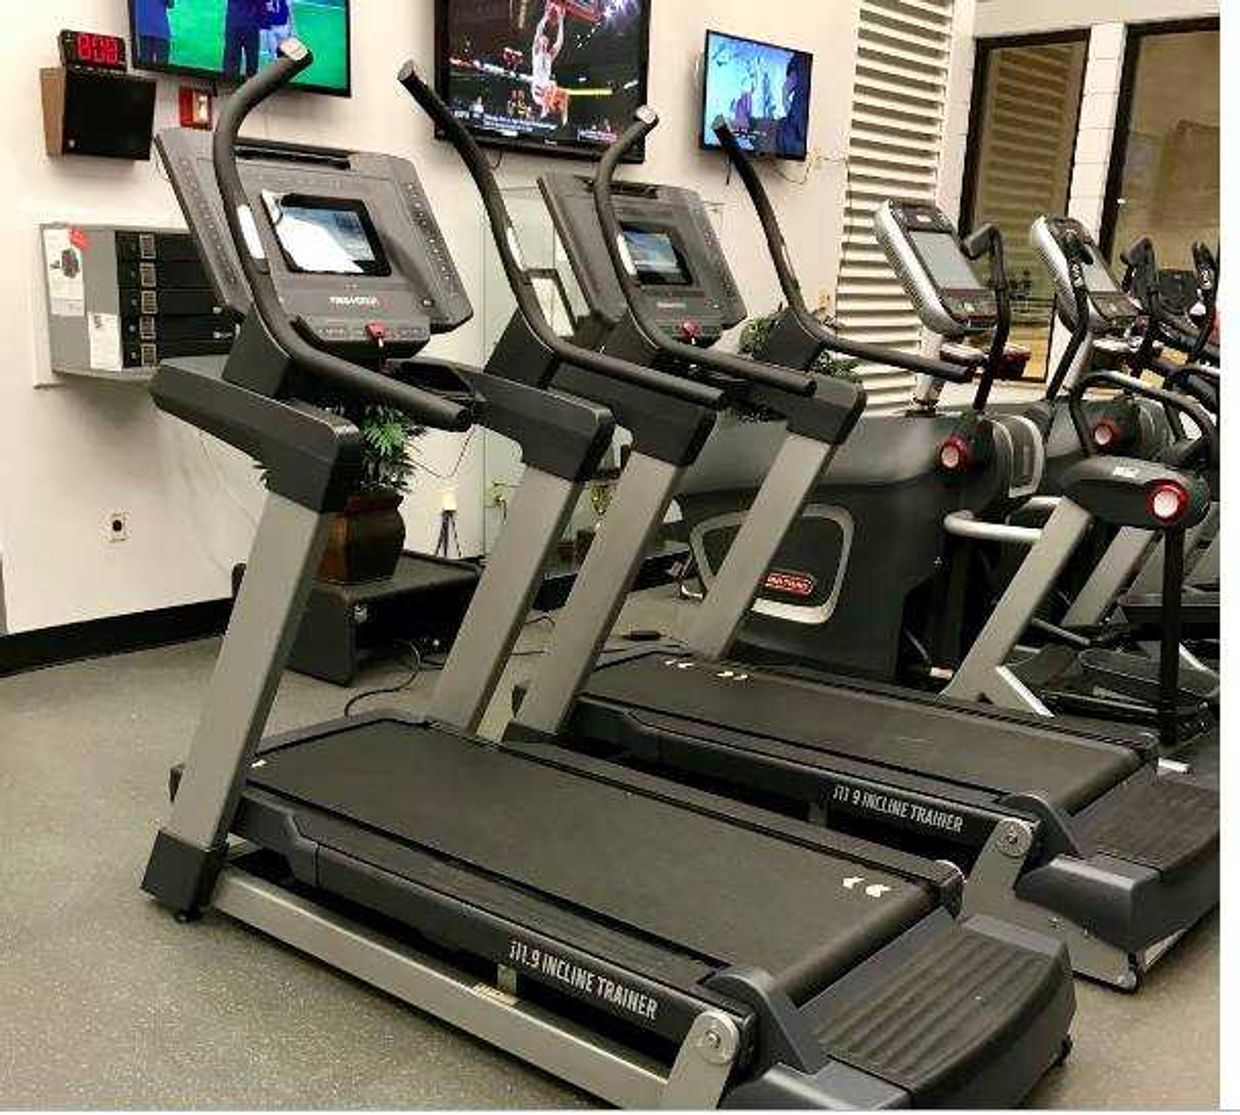 Picture of the freemotion treadmills located on the first and second floor of the Recreation Center.
